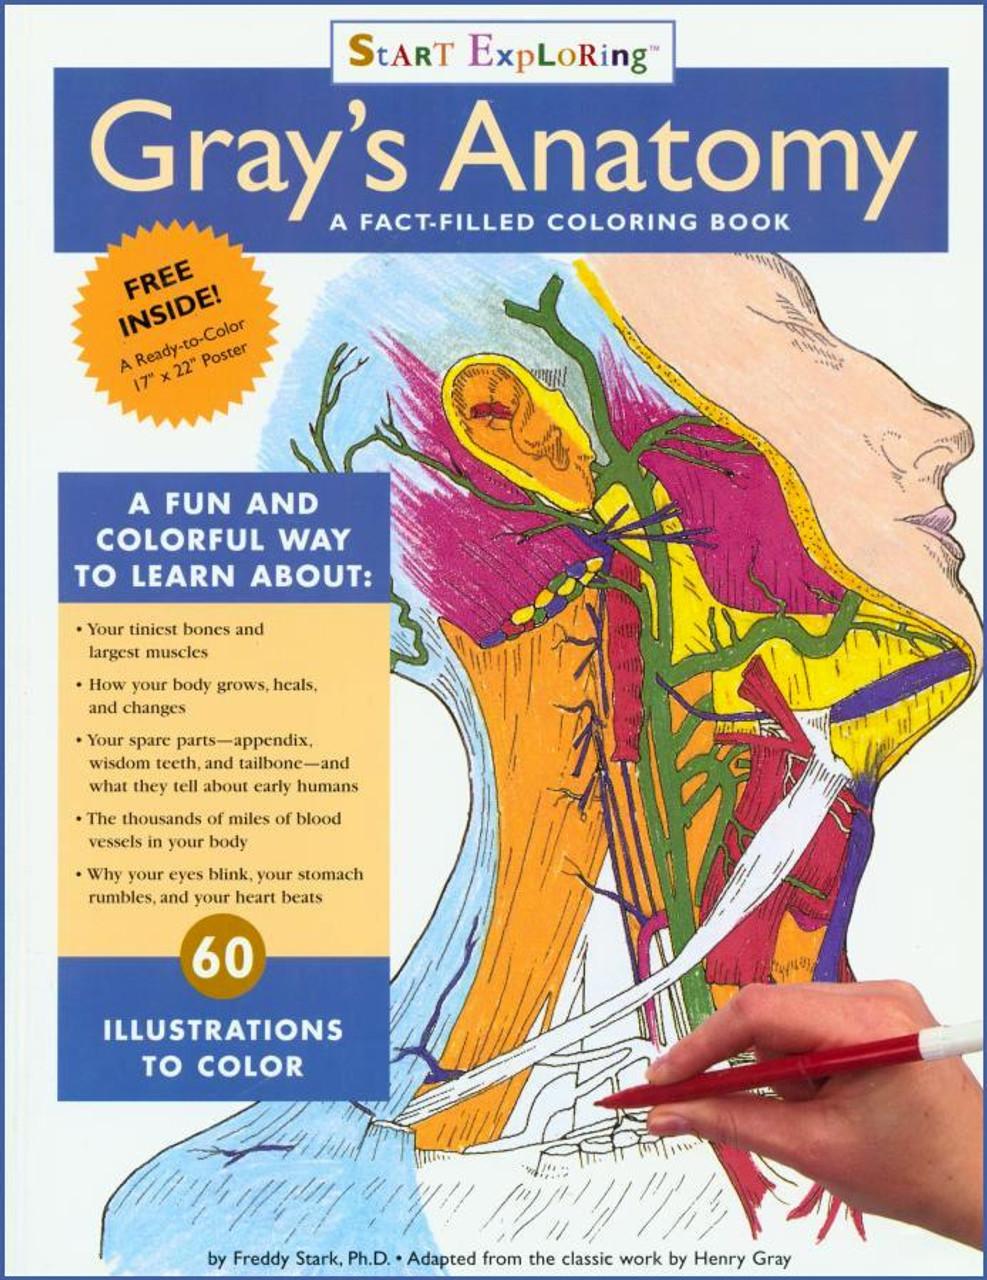 Gray's Anatomy Coloring Book